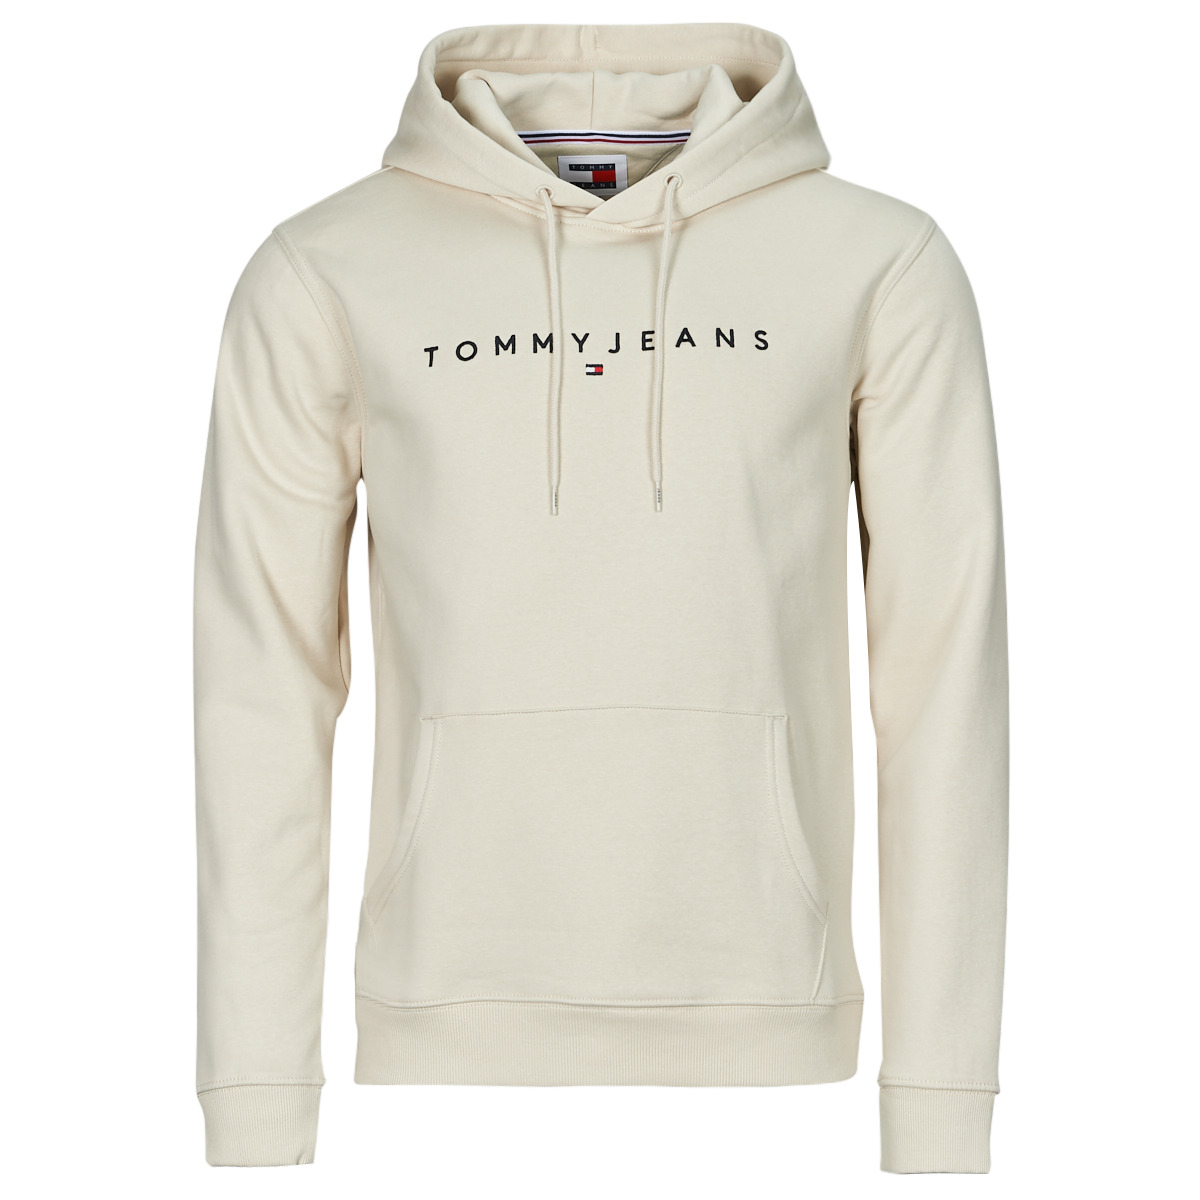 Tommy Jeans TJM REG LINEAR LOGO HOODIE EXT Beige - Free delivery | Spartoo  NET ! - Clothing sweaters Men